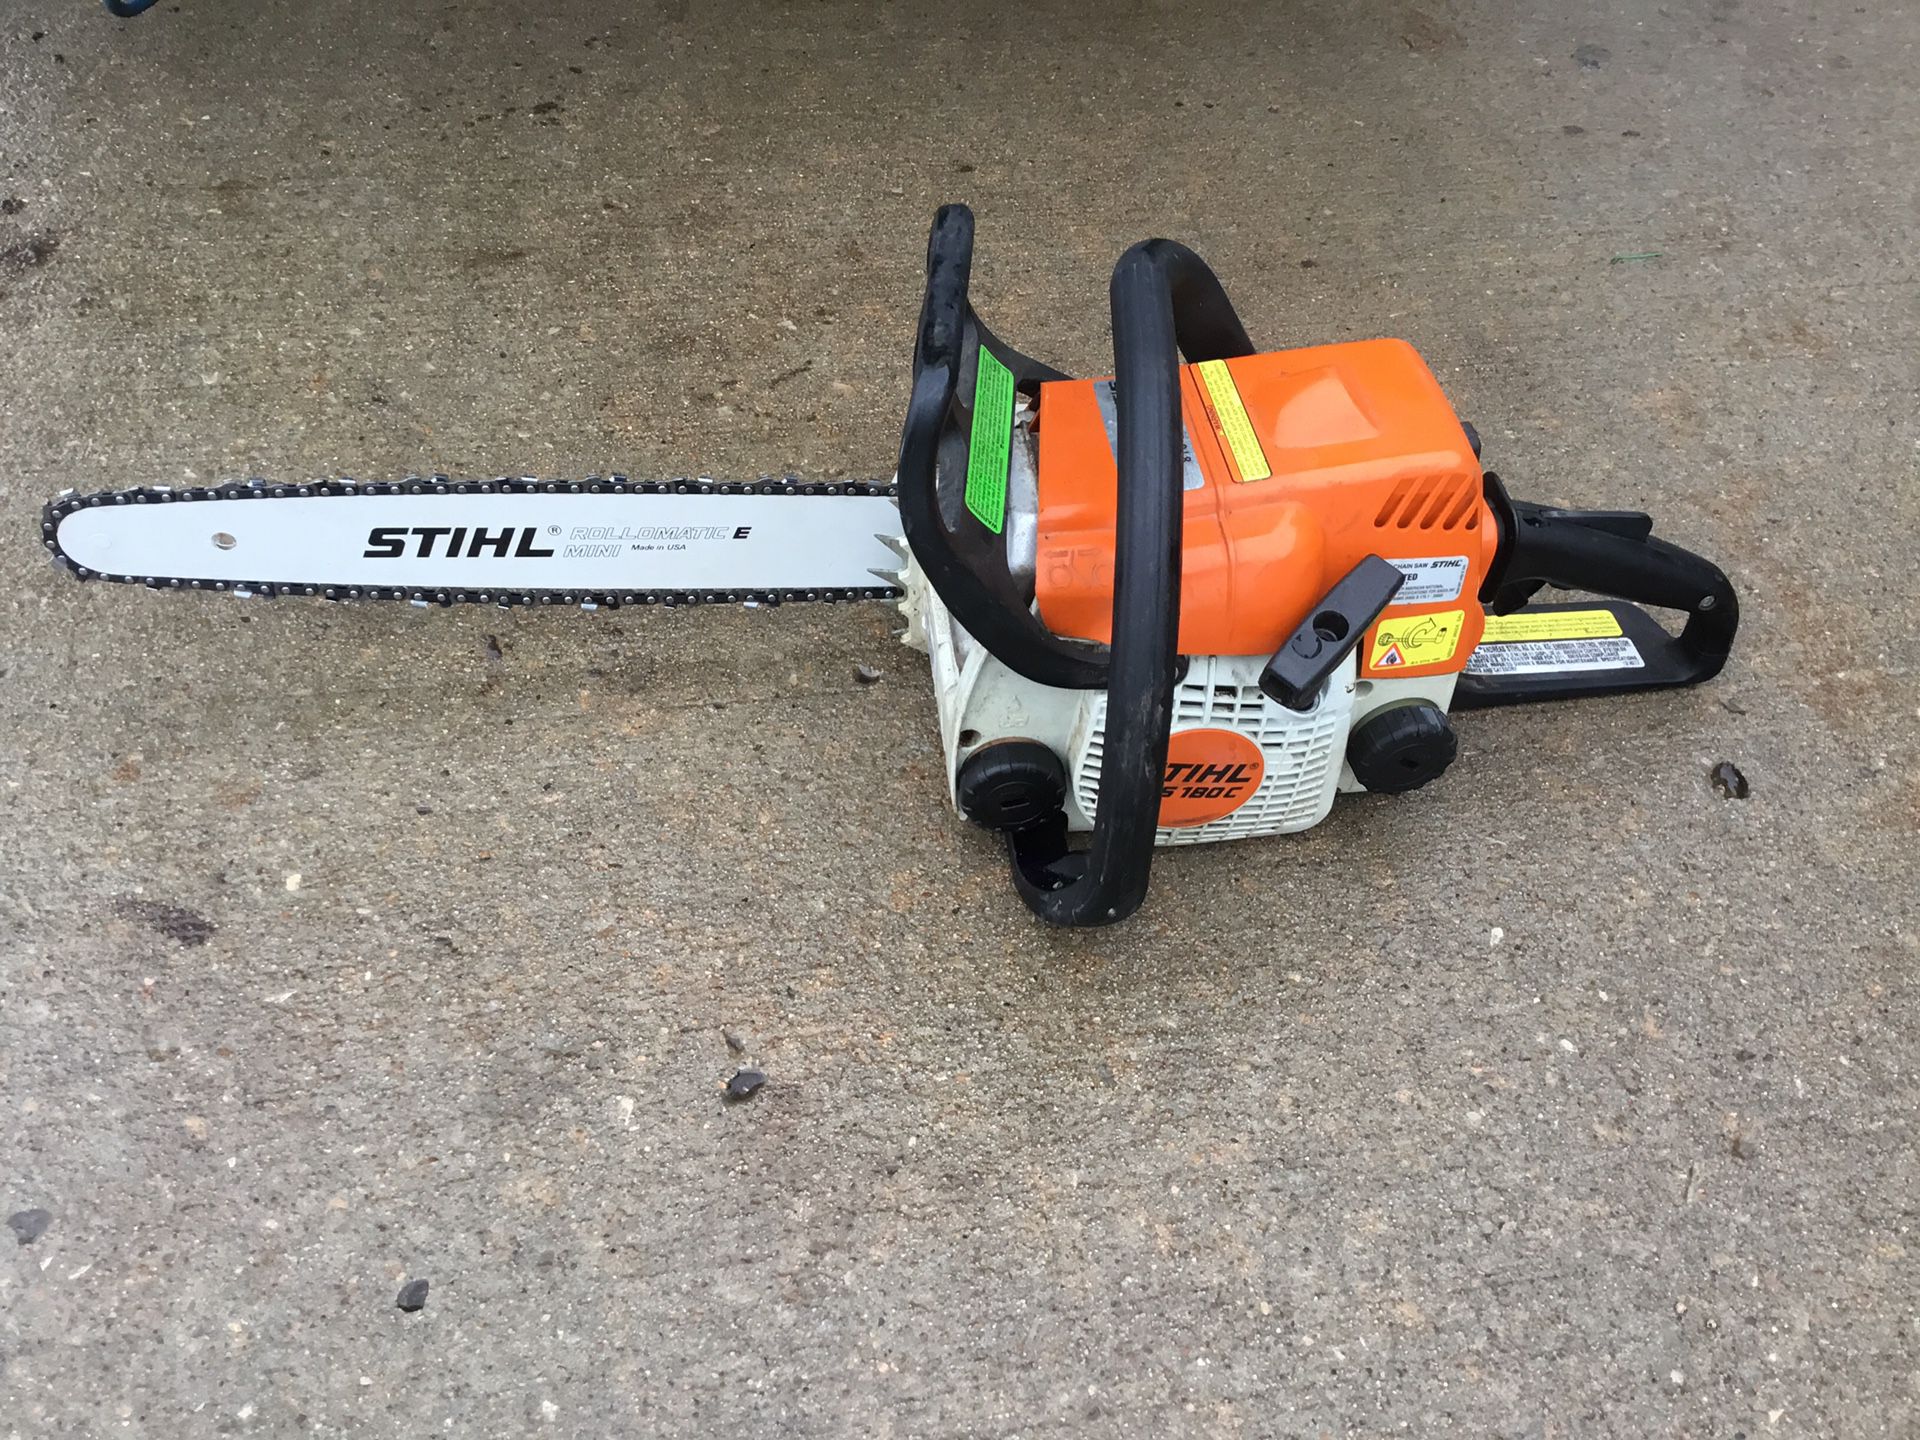 Stihl MS 180c w/new rollomatic bar. No tools needed to change or tighten. New 16” bar and chain!!!